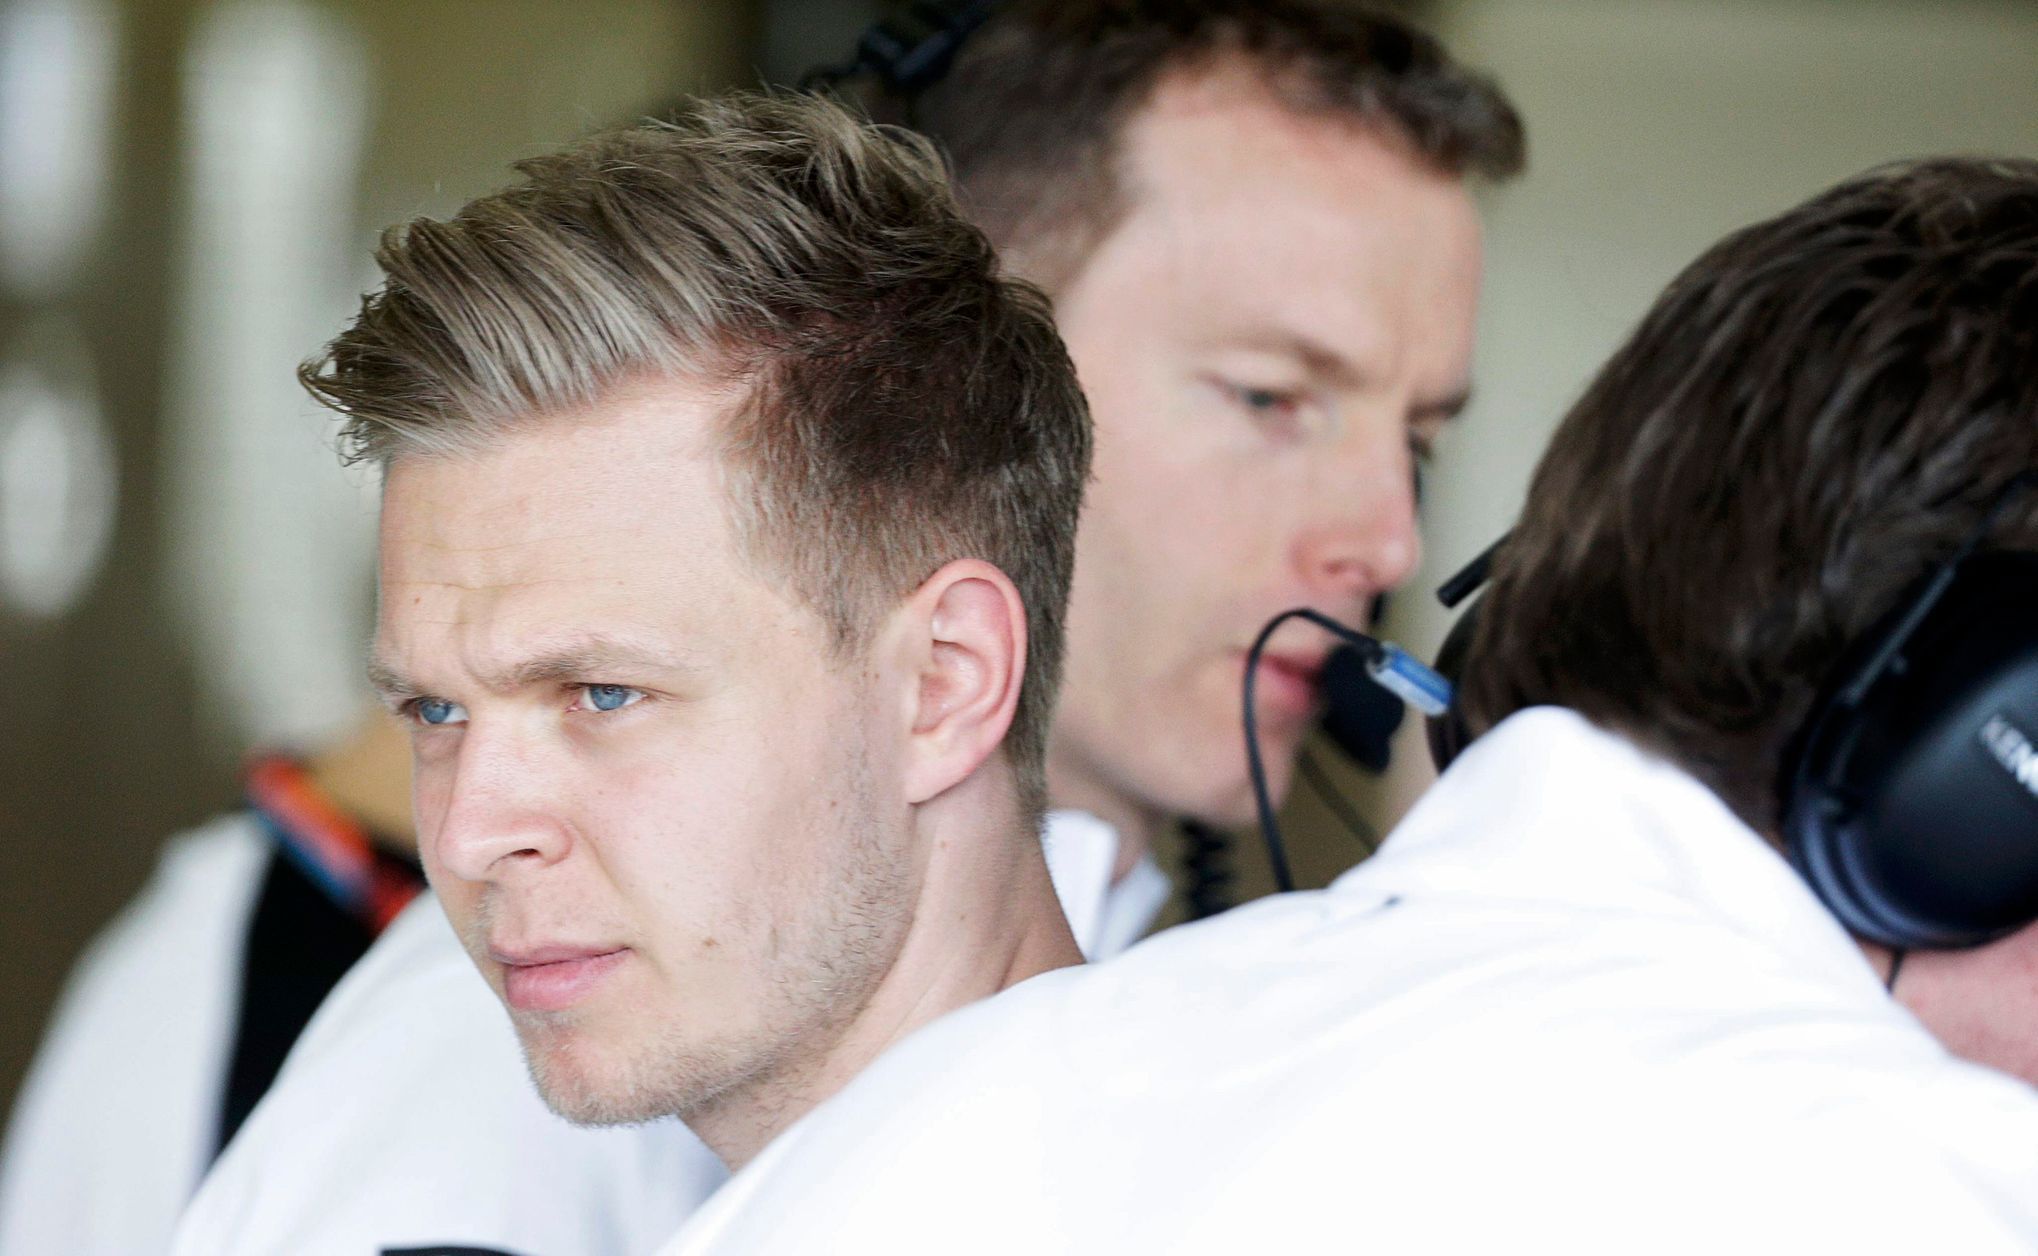 McLaren Formula One driver Kevin Magnussen of Denmark looks on in the team garage during the third practice session of the Australian F1 Grand Prix at the Albert Park circuit in Melbourne